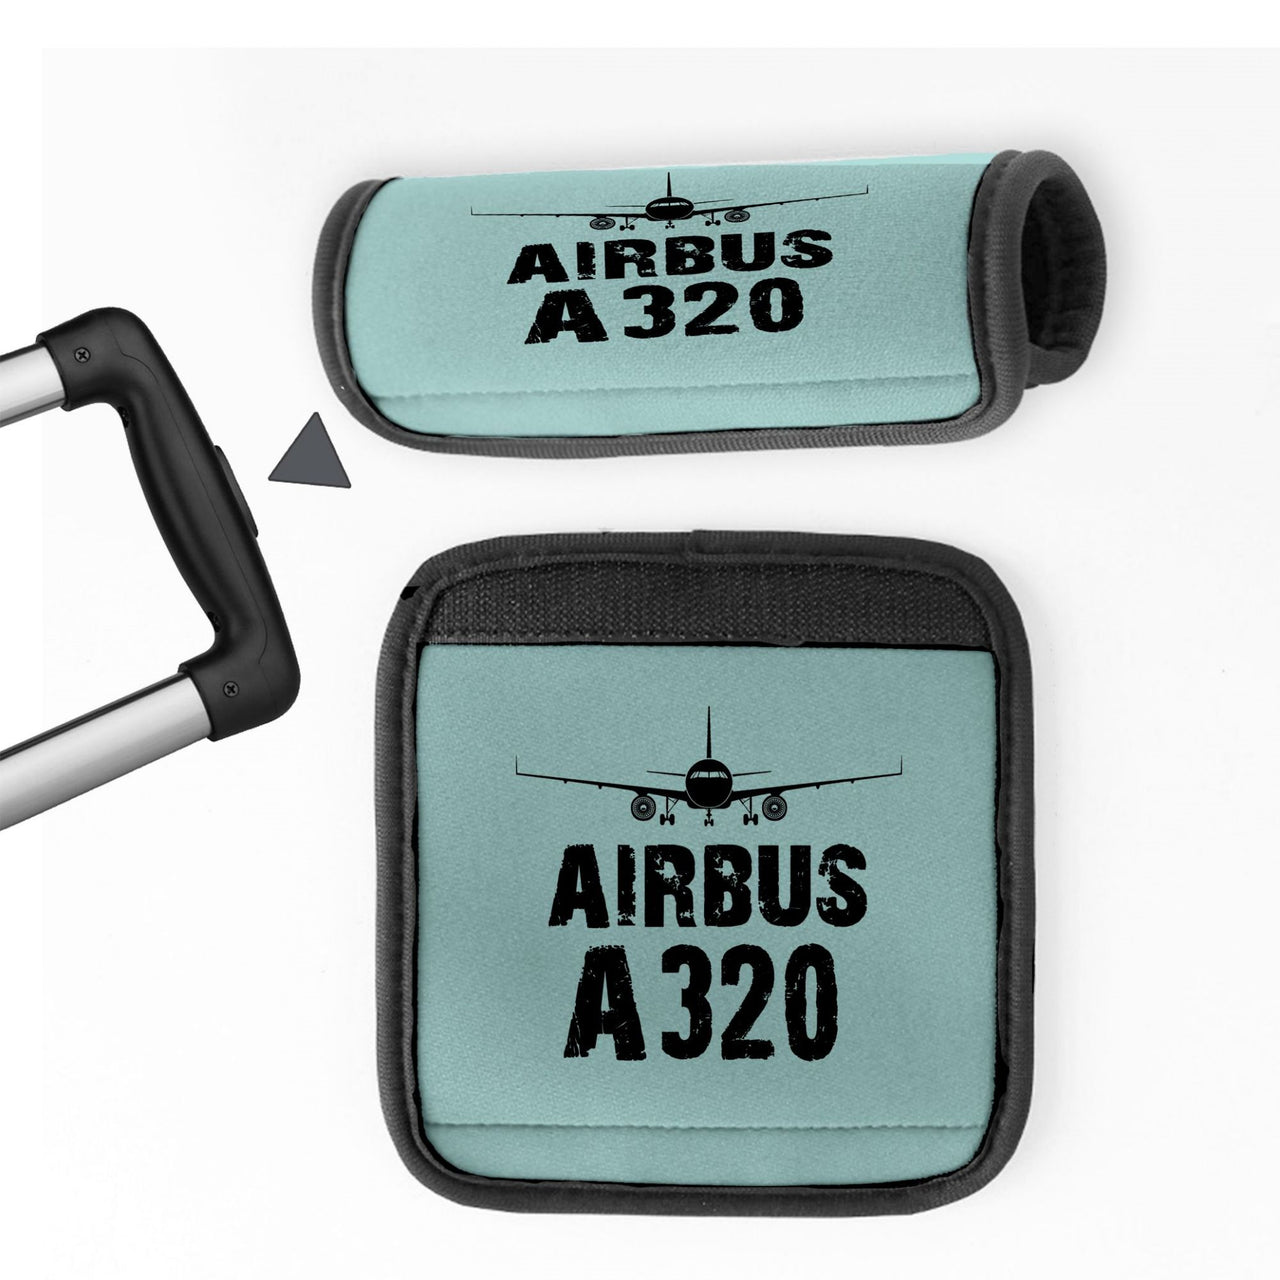 Airbus A320 & Plane Designed Neoprene Luggage Handle Covers